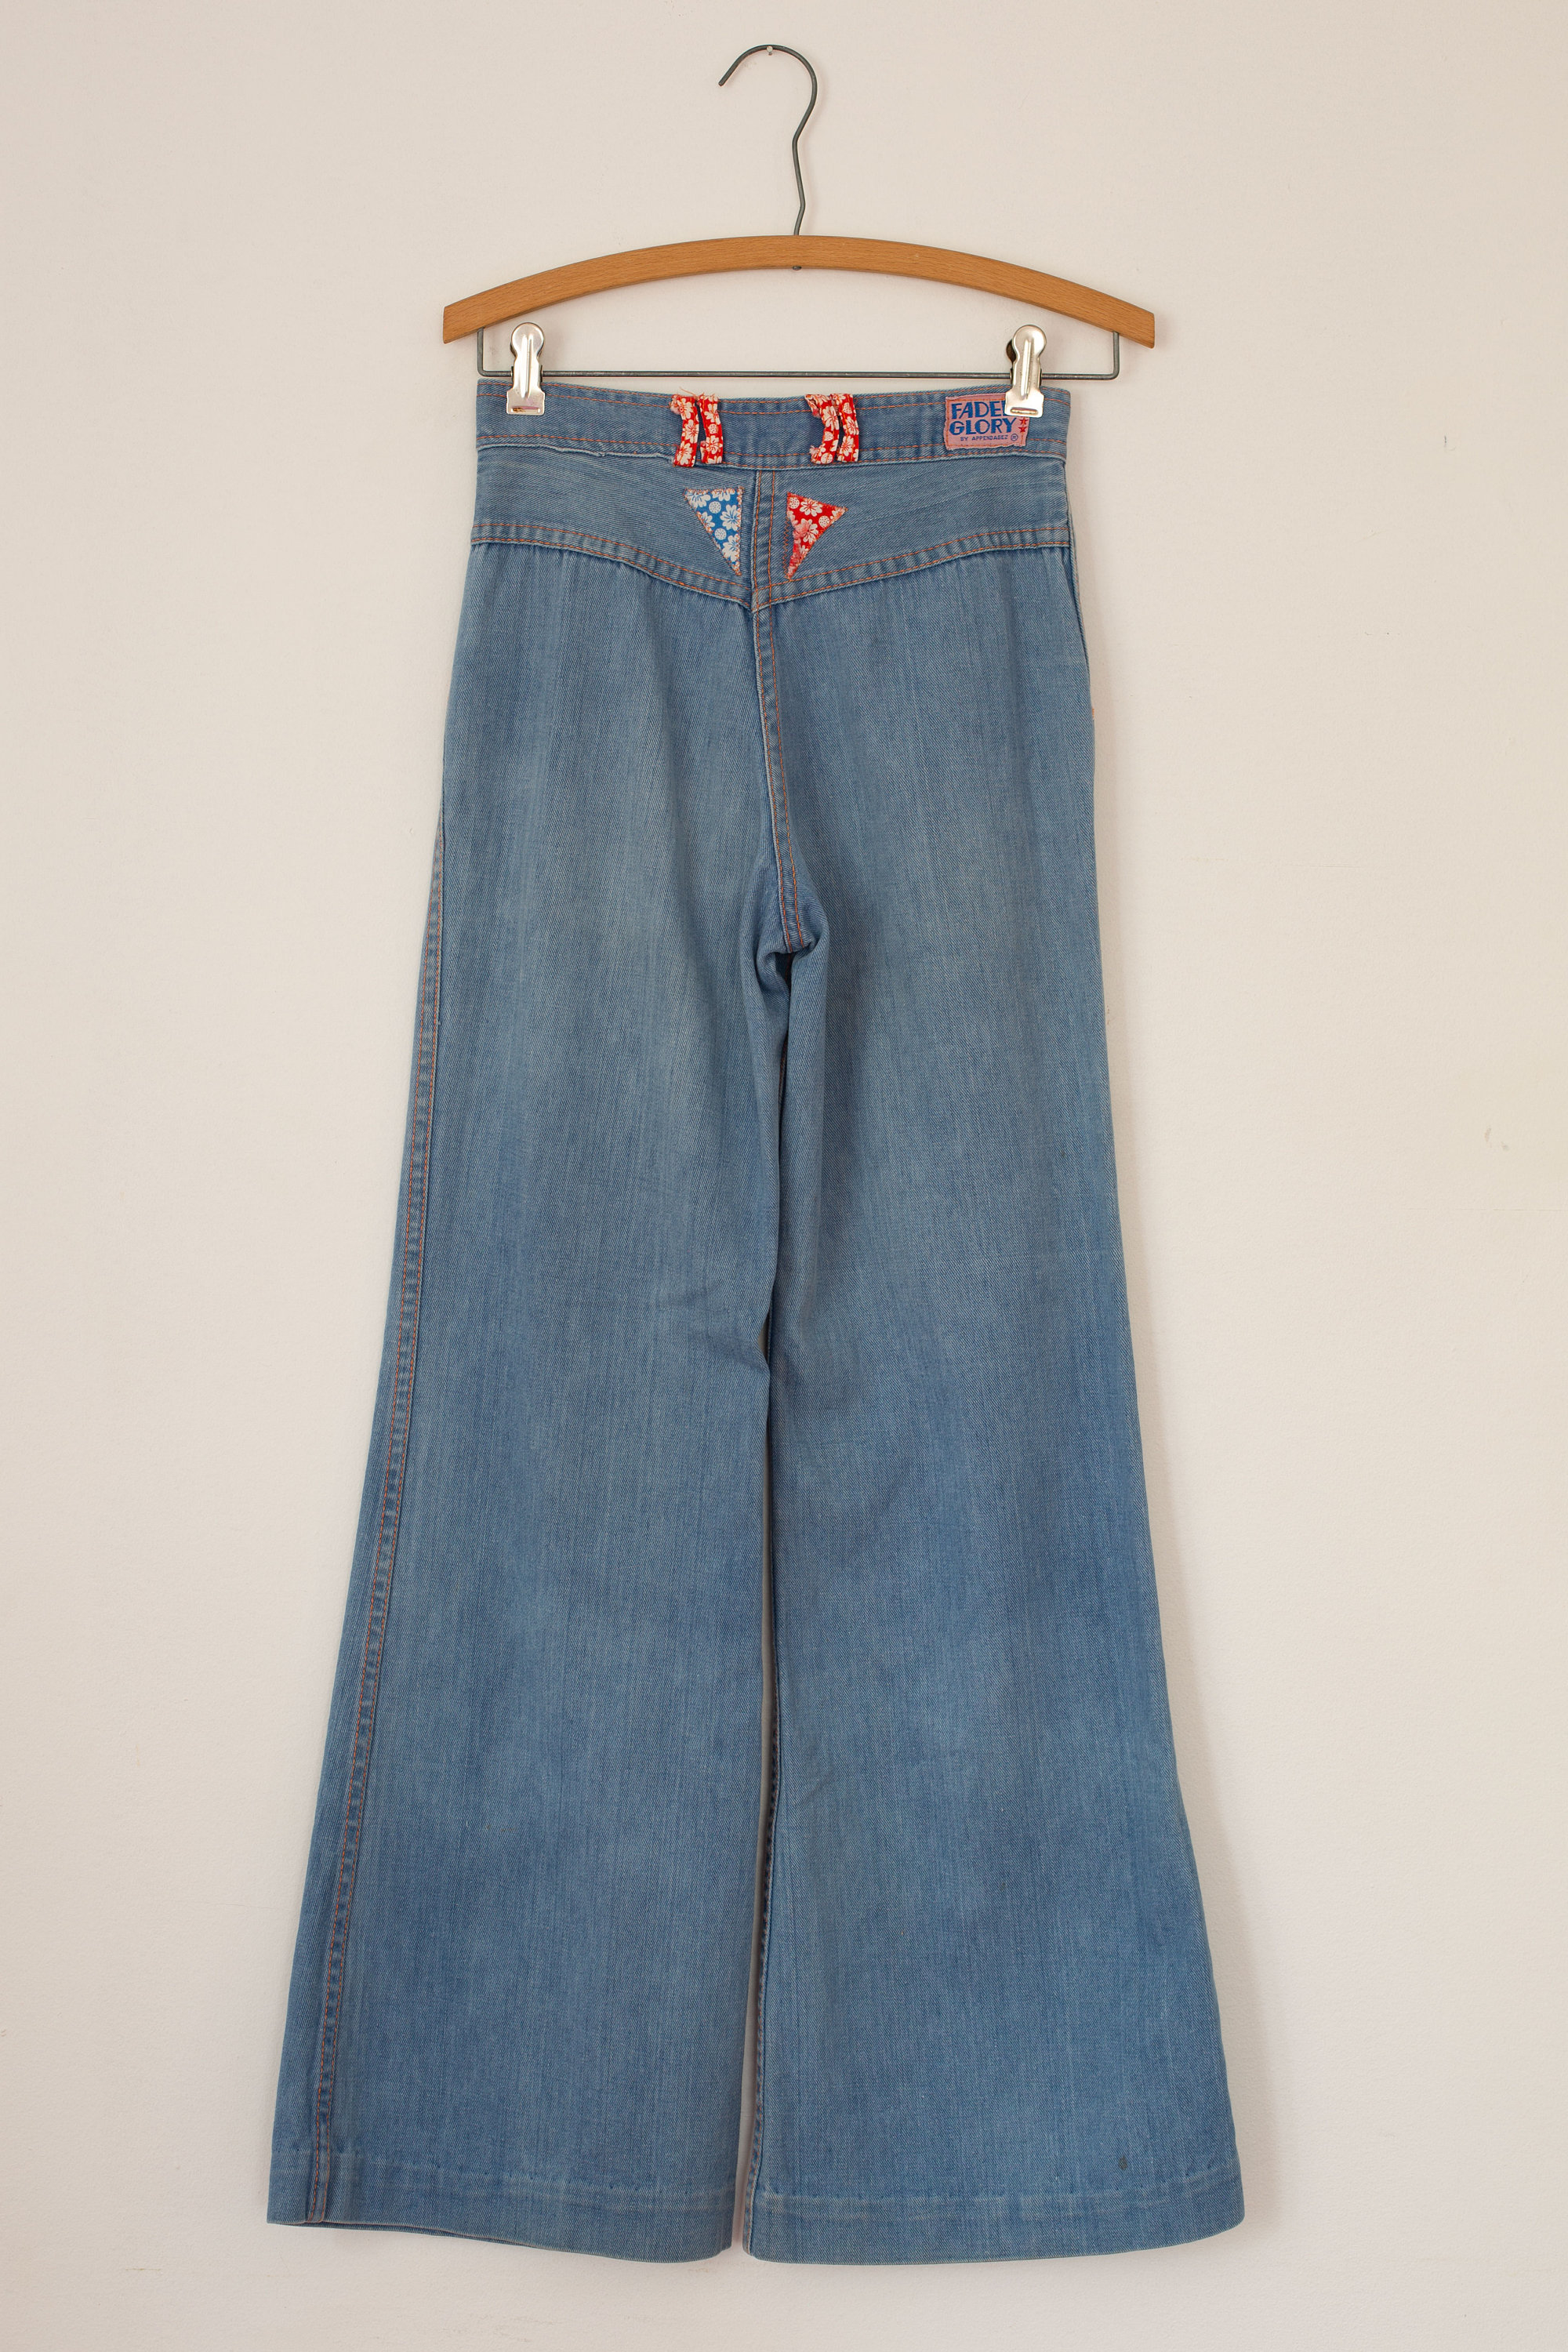 Sazz Vintage Clothing: (31x30) Womens 1970s Jeans! Faded BELL